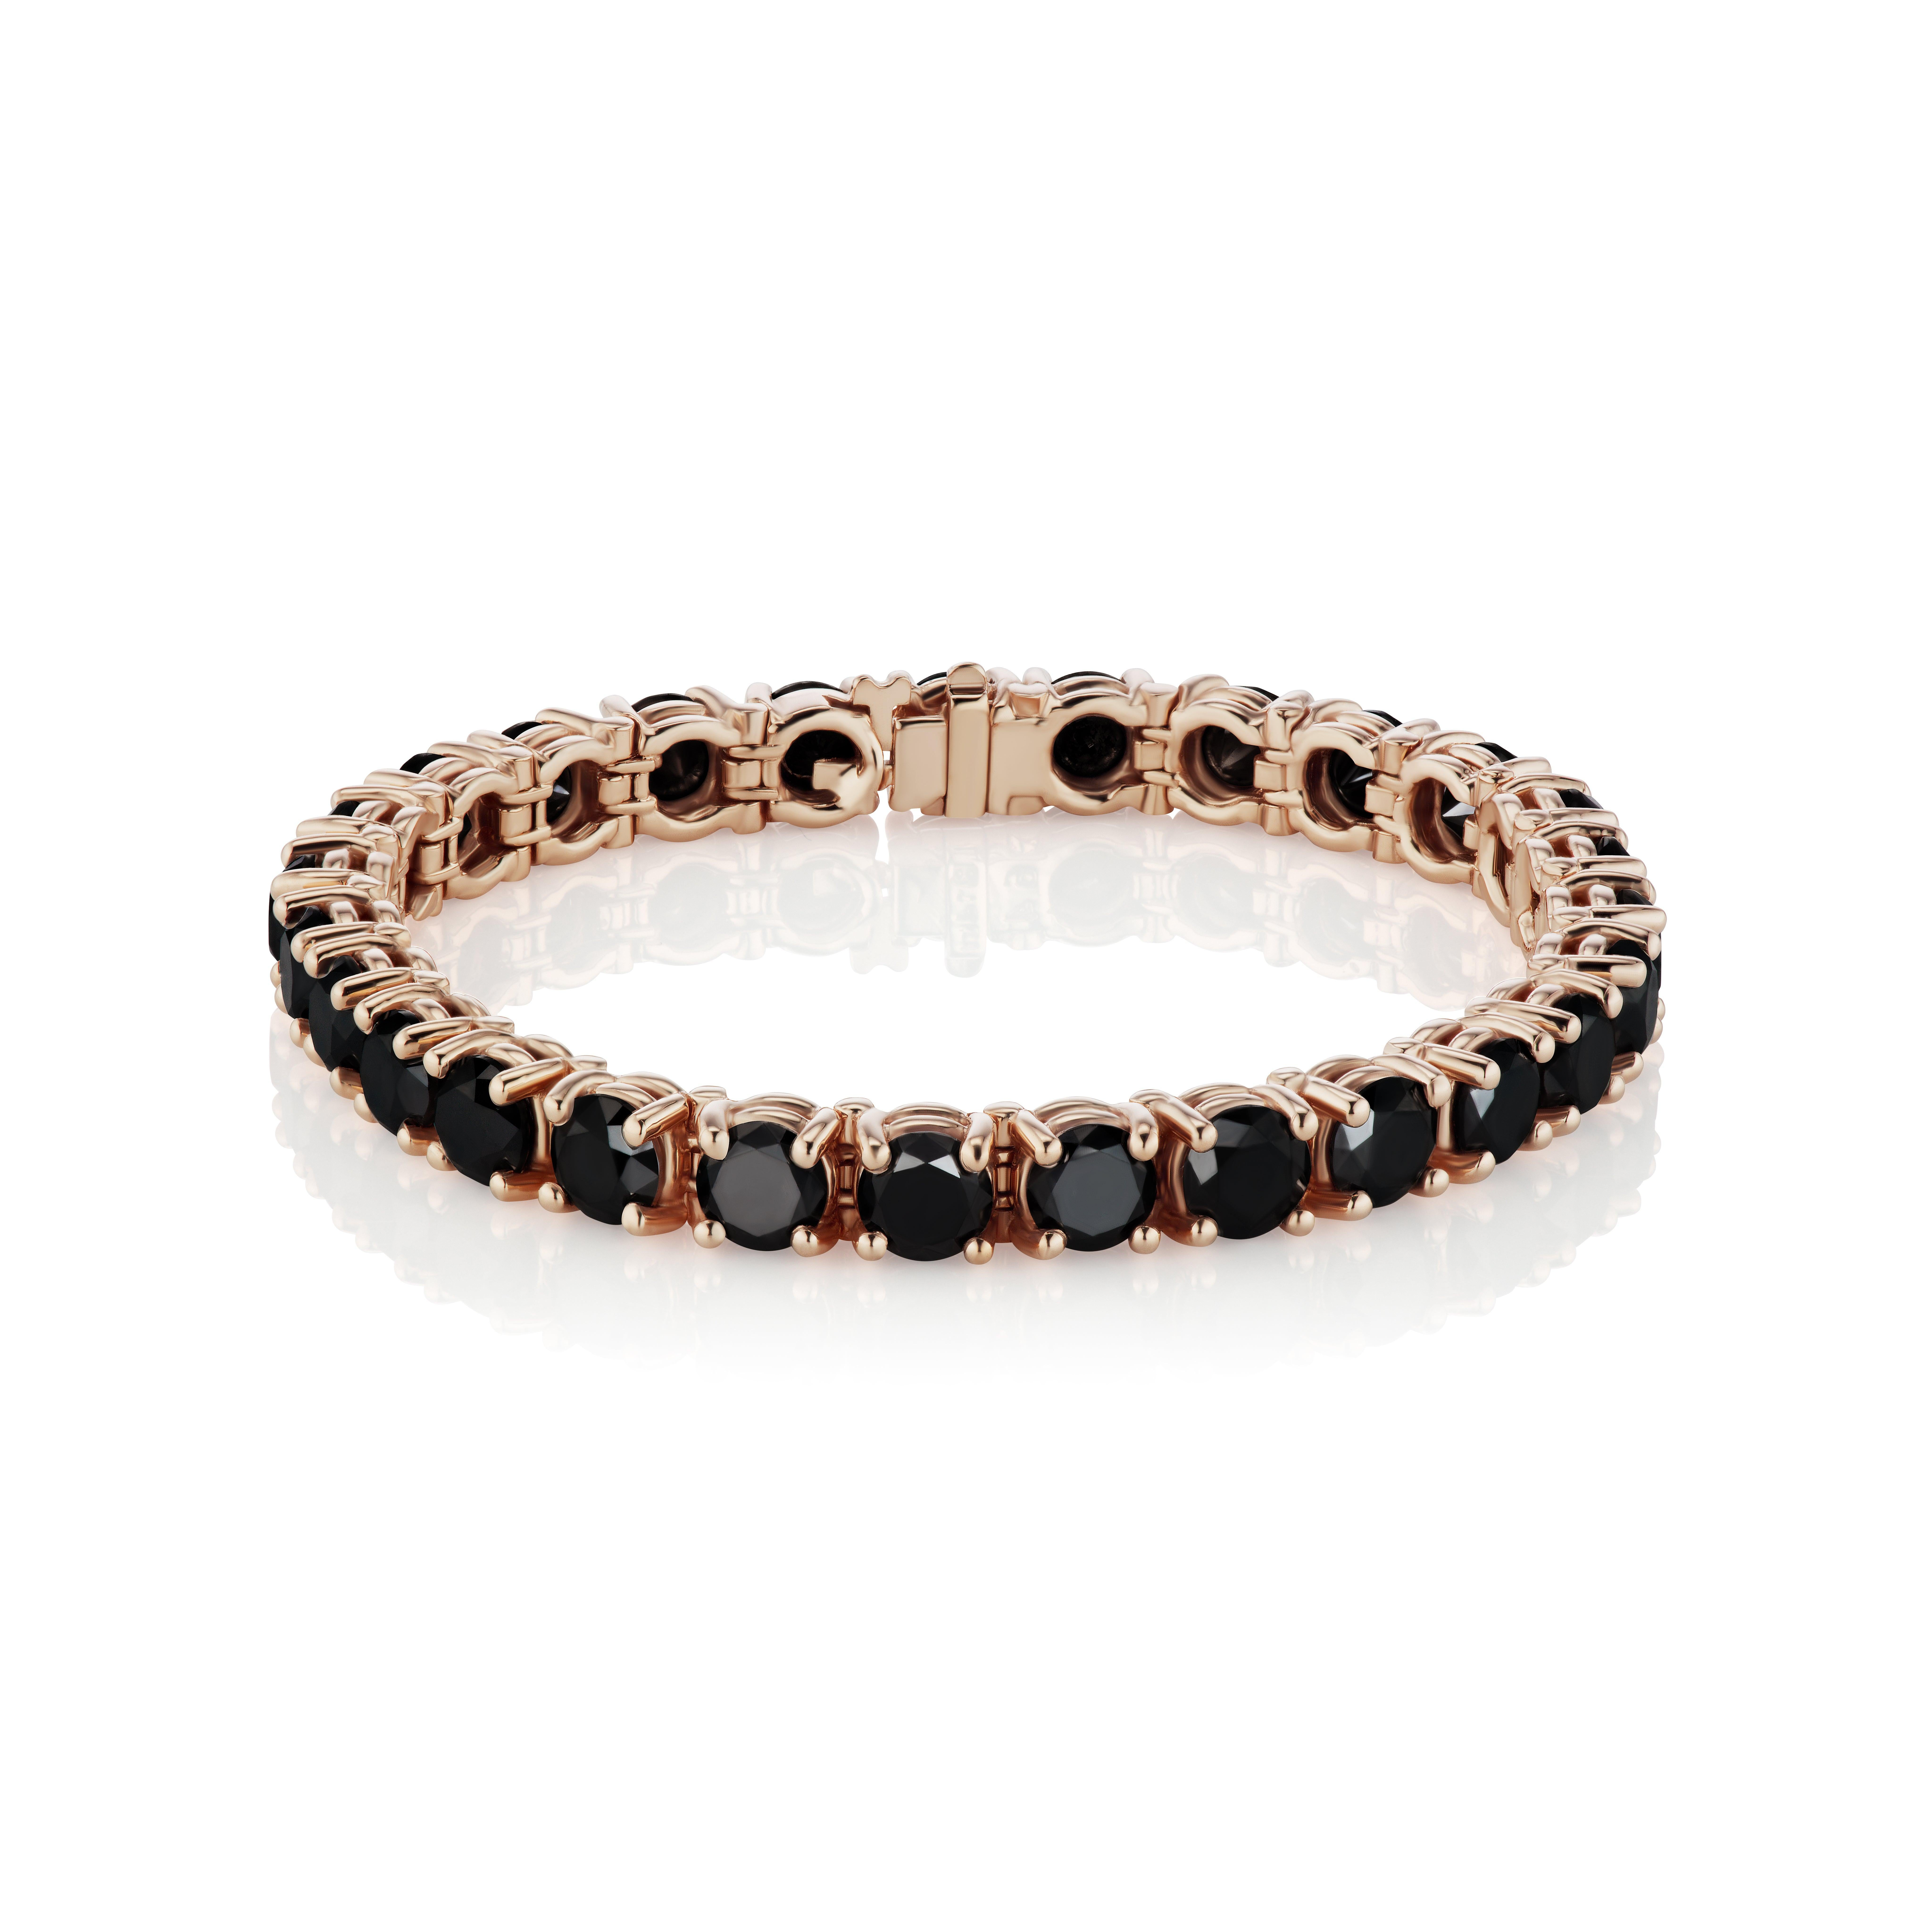 25 Round Black Diamonds weighing approximately 25.20 Carats.
Set in 14 Karat Rose Gold.
6.75 Inches